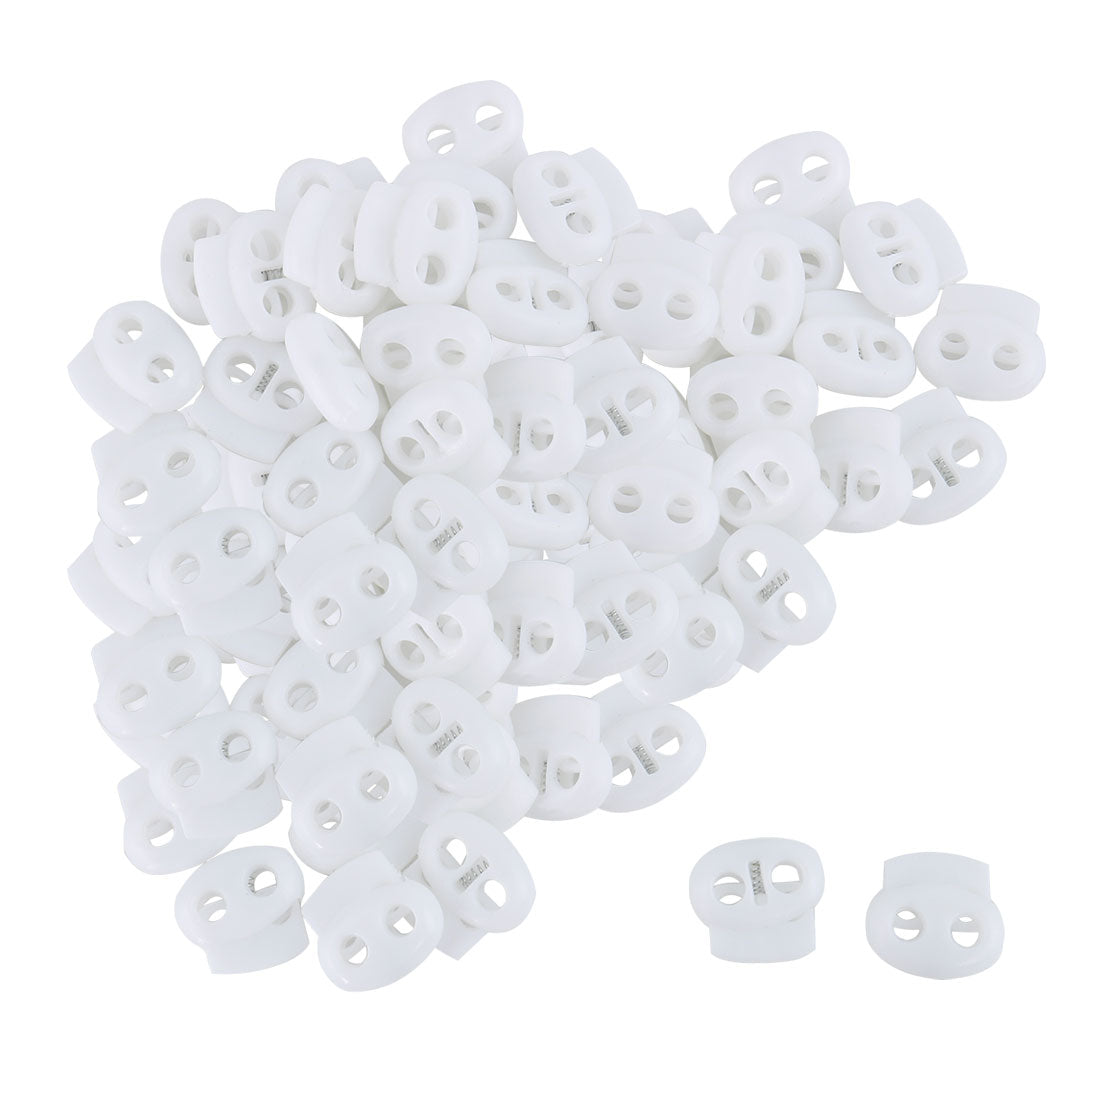 uxcell Uxcell 50 Pcs Plastic Cord Locks Double Hole End Stopper Spring Toggle Fastener, White